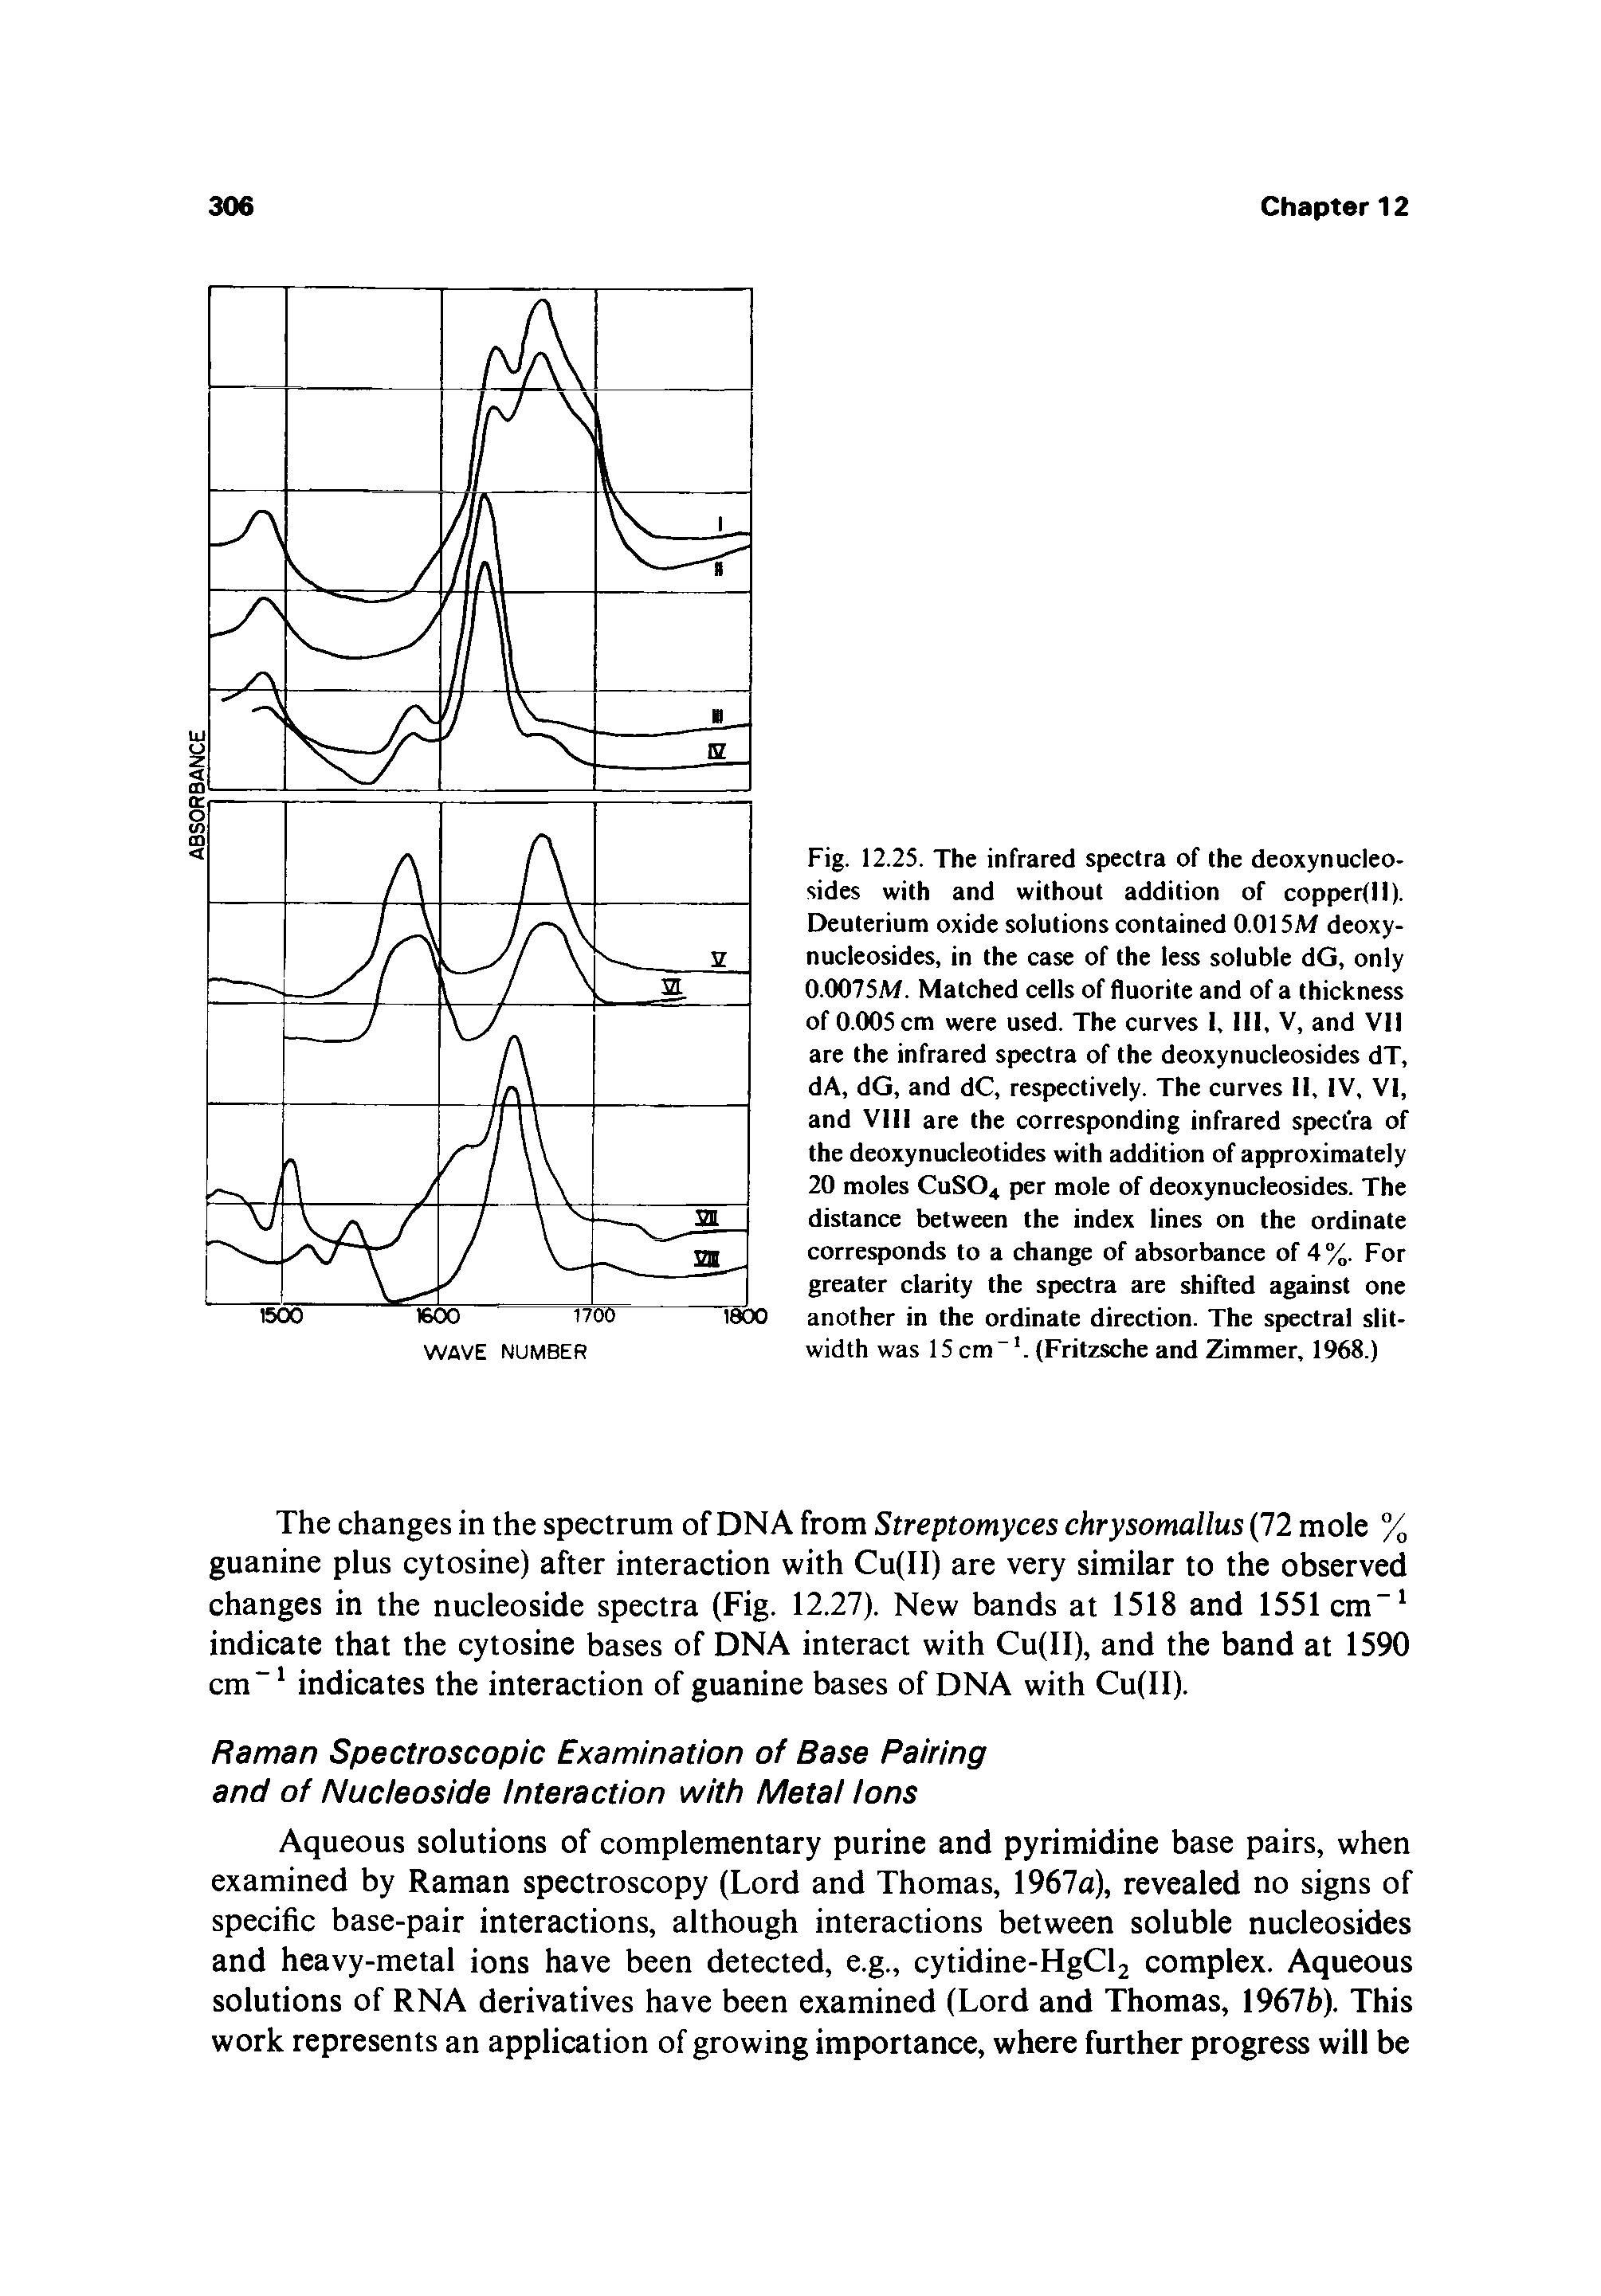 Fig. 12.25. The infrared spectra of the deoxynucleo-sides with and without addition of copperfll). Deuterium oxide solutions contained 0.015M deoxy-nucleosides, in the case of the less soluble dG, only 0.0075M. Matched cells of fluorite and of a thickness of 0.005cm were used. The curves I, III, V, and VII are the infrared spectra of the deoxynucleosides dT, dA, dG, and dC, respectively. The curves II, IV, VI, and VIII are the corresponding infrared spectra of the deoxynucleotides with addition of approximately 20 moles CUSO4 per mole of deoxynucleosides. The distance between the index lines on the ordinate corresponds to a change of absorbance of 4%. For greater clarity the spectra are shifted against one another in the ordinate direction. The spectral slit-width was 15 cm . (Fritzsche and Zimmer, 1968.)...